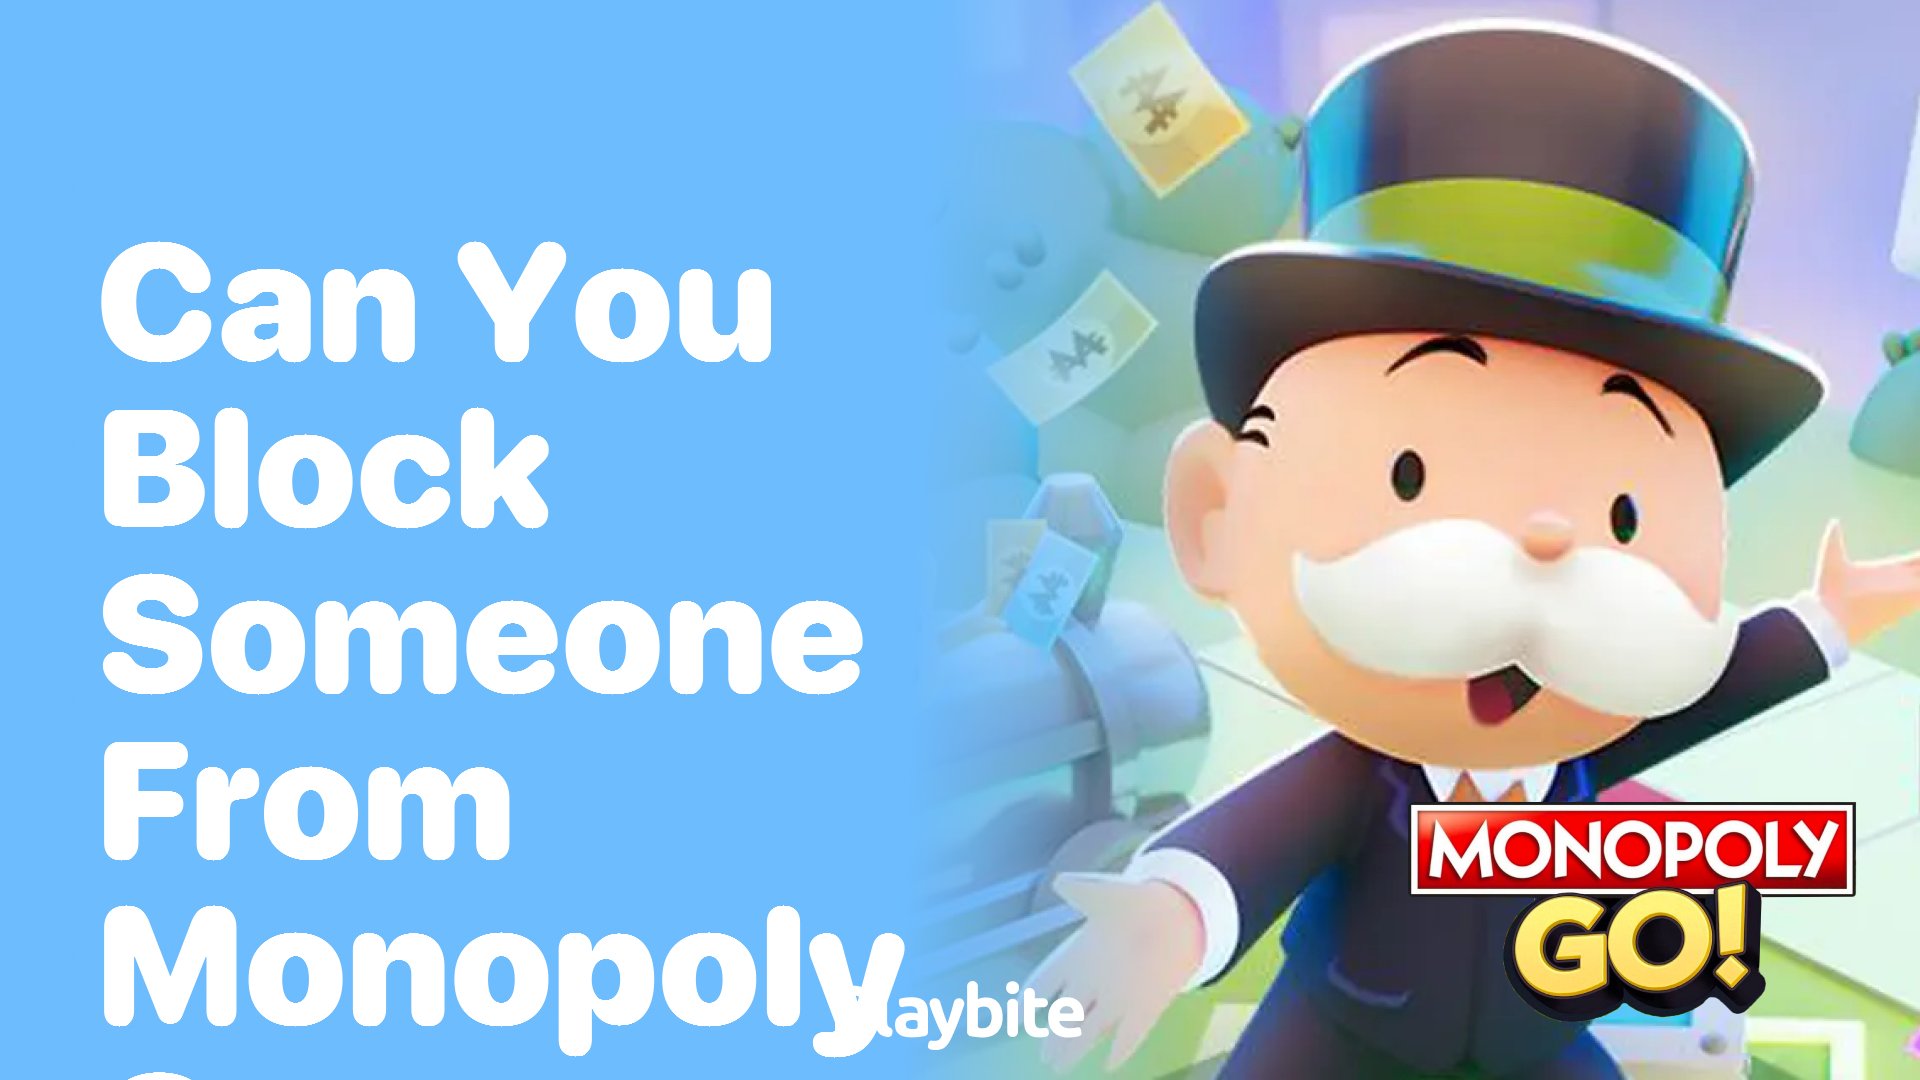 Can You Block Someone From Monopoly Go?